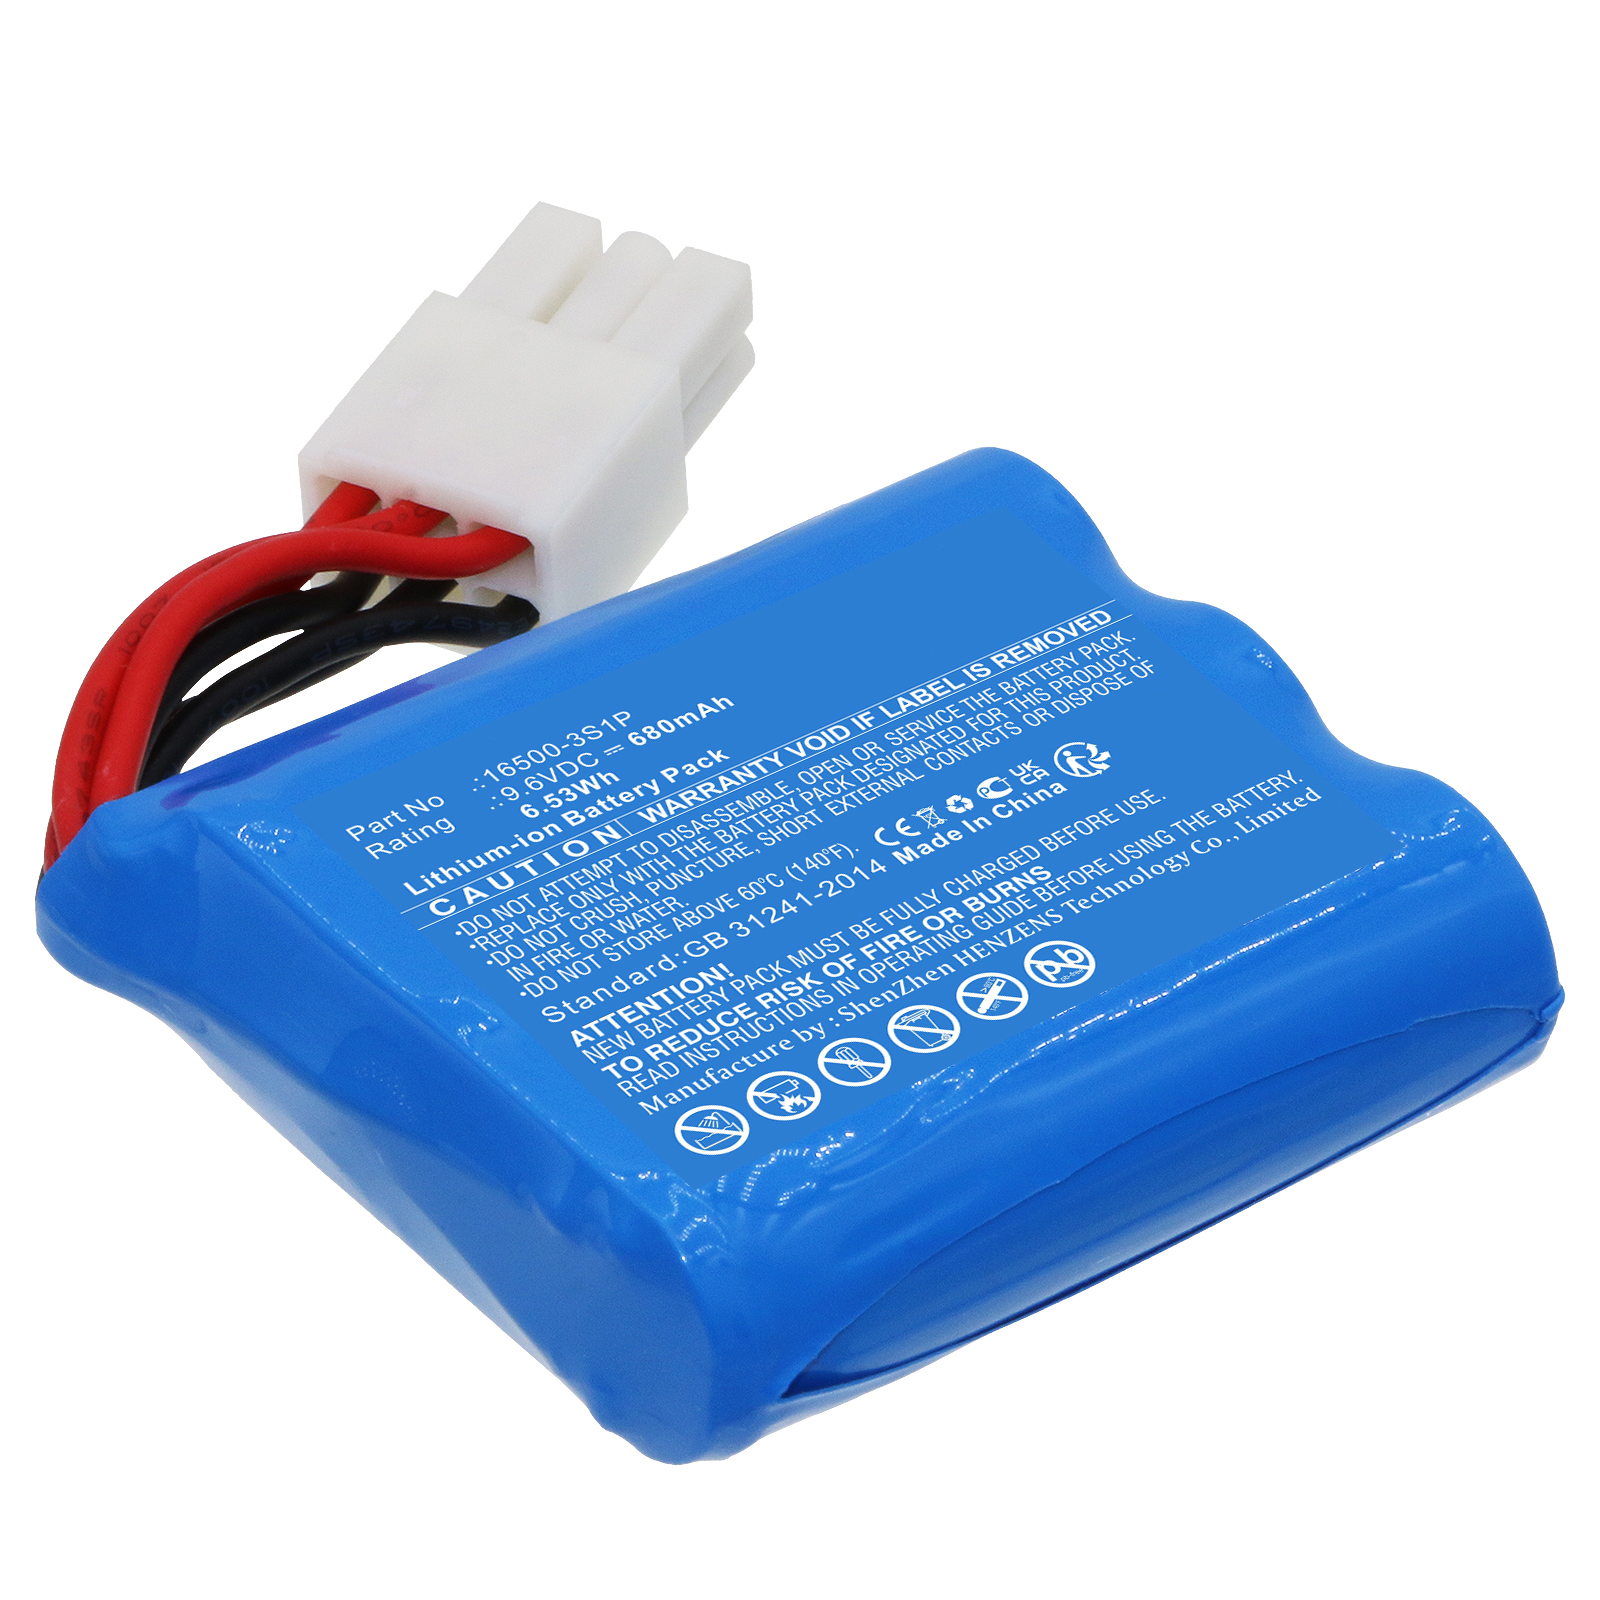 Synergy Digital Cars Battery, Compatible with GPToys 16500-3S1P Cars Battery (Li-ion, 9.6V, 680mAh)